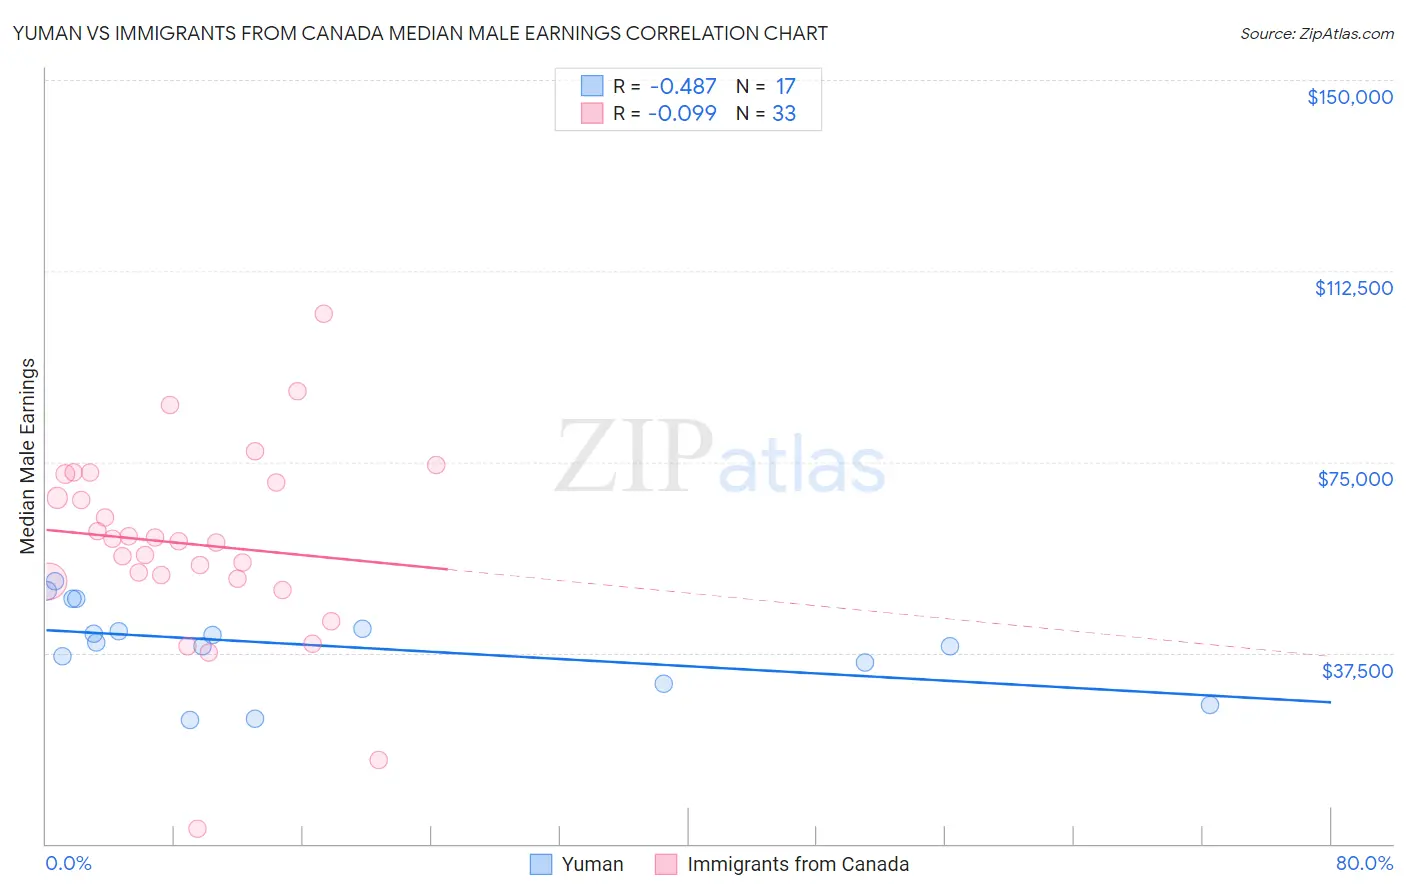 Yuman vs Immigrants from Canada Median Male Earnings